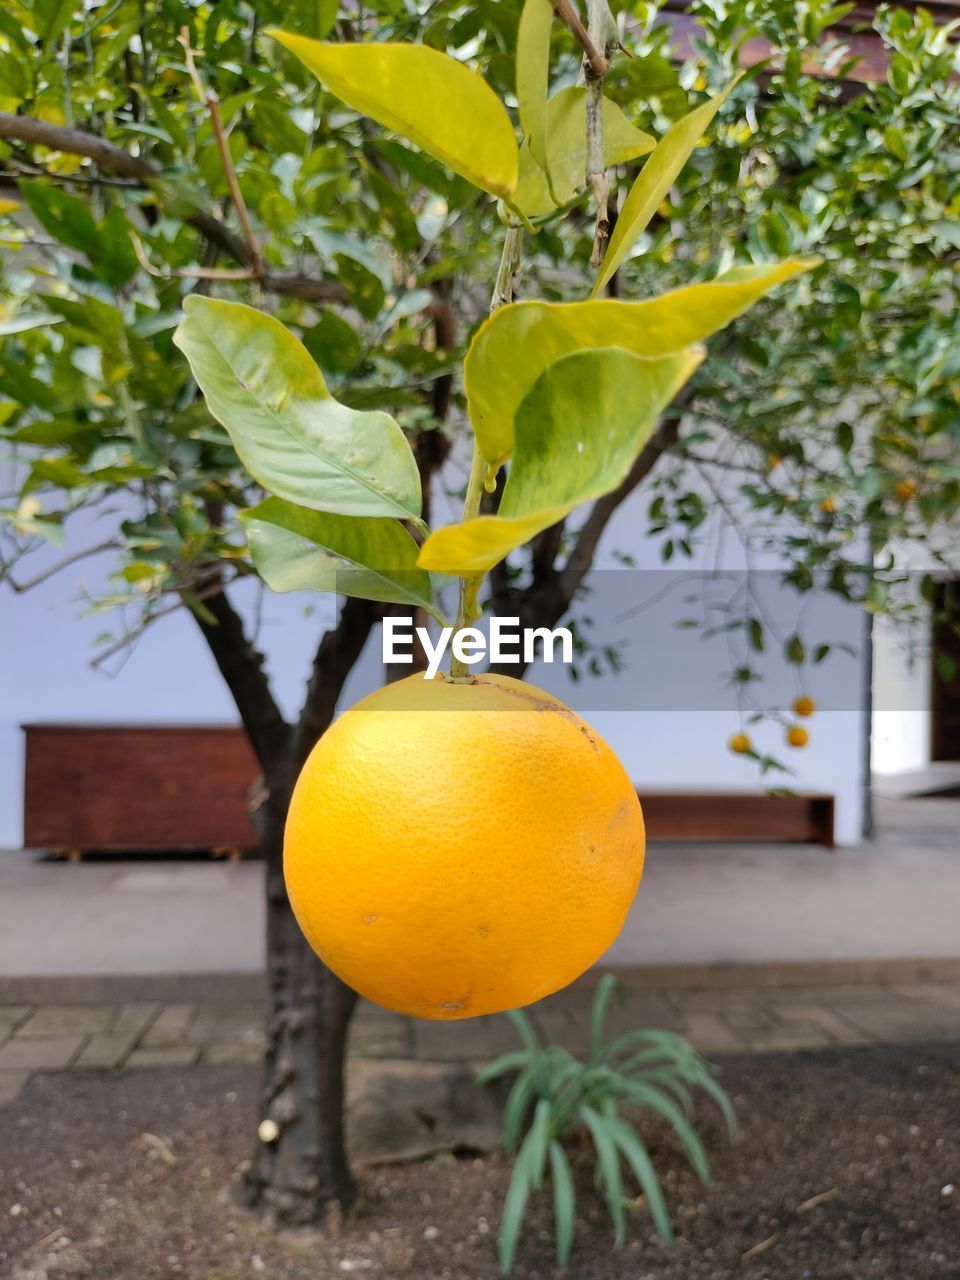 fruit, plant, citrus fruit, tree, produce, food, food and drink, healthy eating, yellow, fruit tree, leaf, citrus, plant part, lemon, nature, freshness, flower, lemon tree, growth, no people, orange, outdoors, wellbeing, agriculture, day, branch, orange color, focus on foreground, green, architecture, hanging, ripe